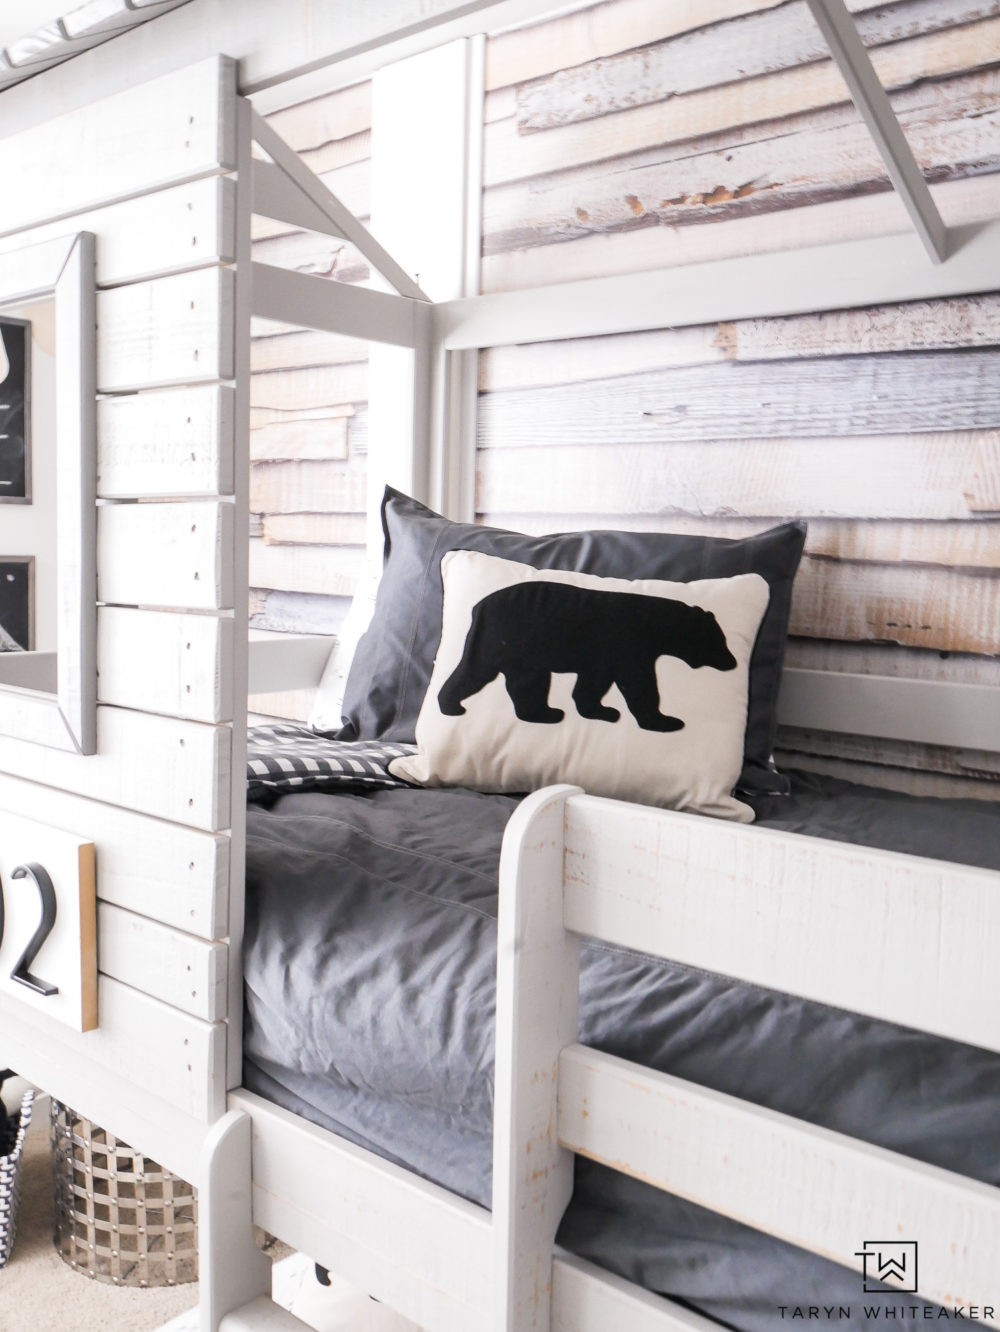 Love this Eddie Bauer charcoal gray beset with flannel underside. Those little bear accent pillows are perfect in here. 